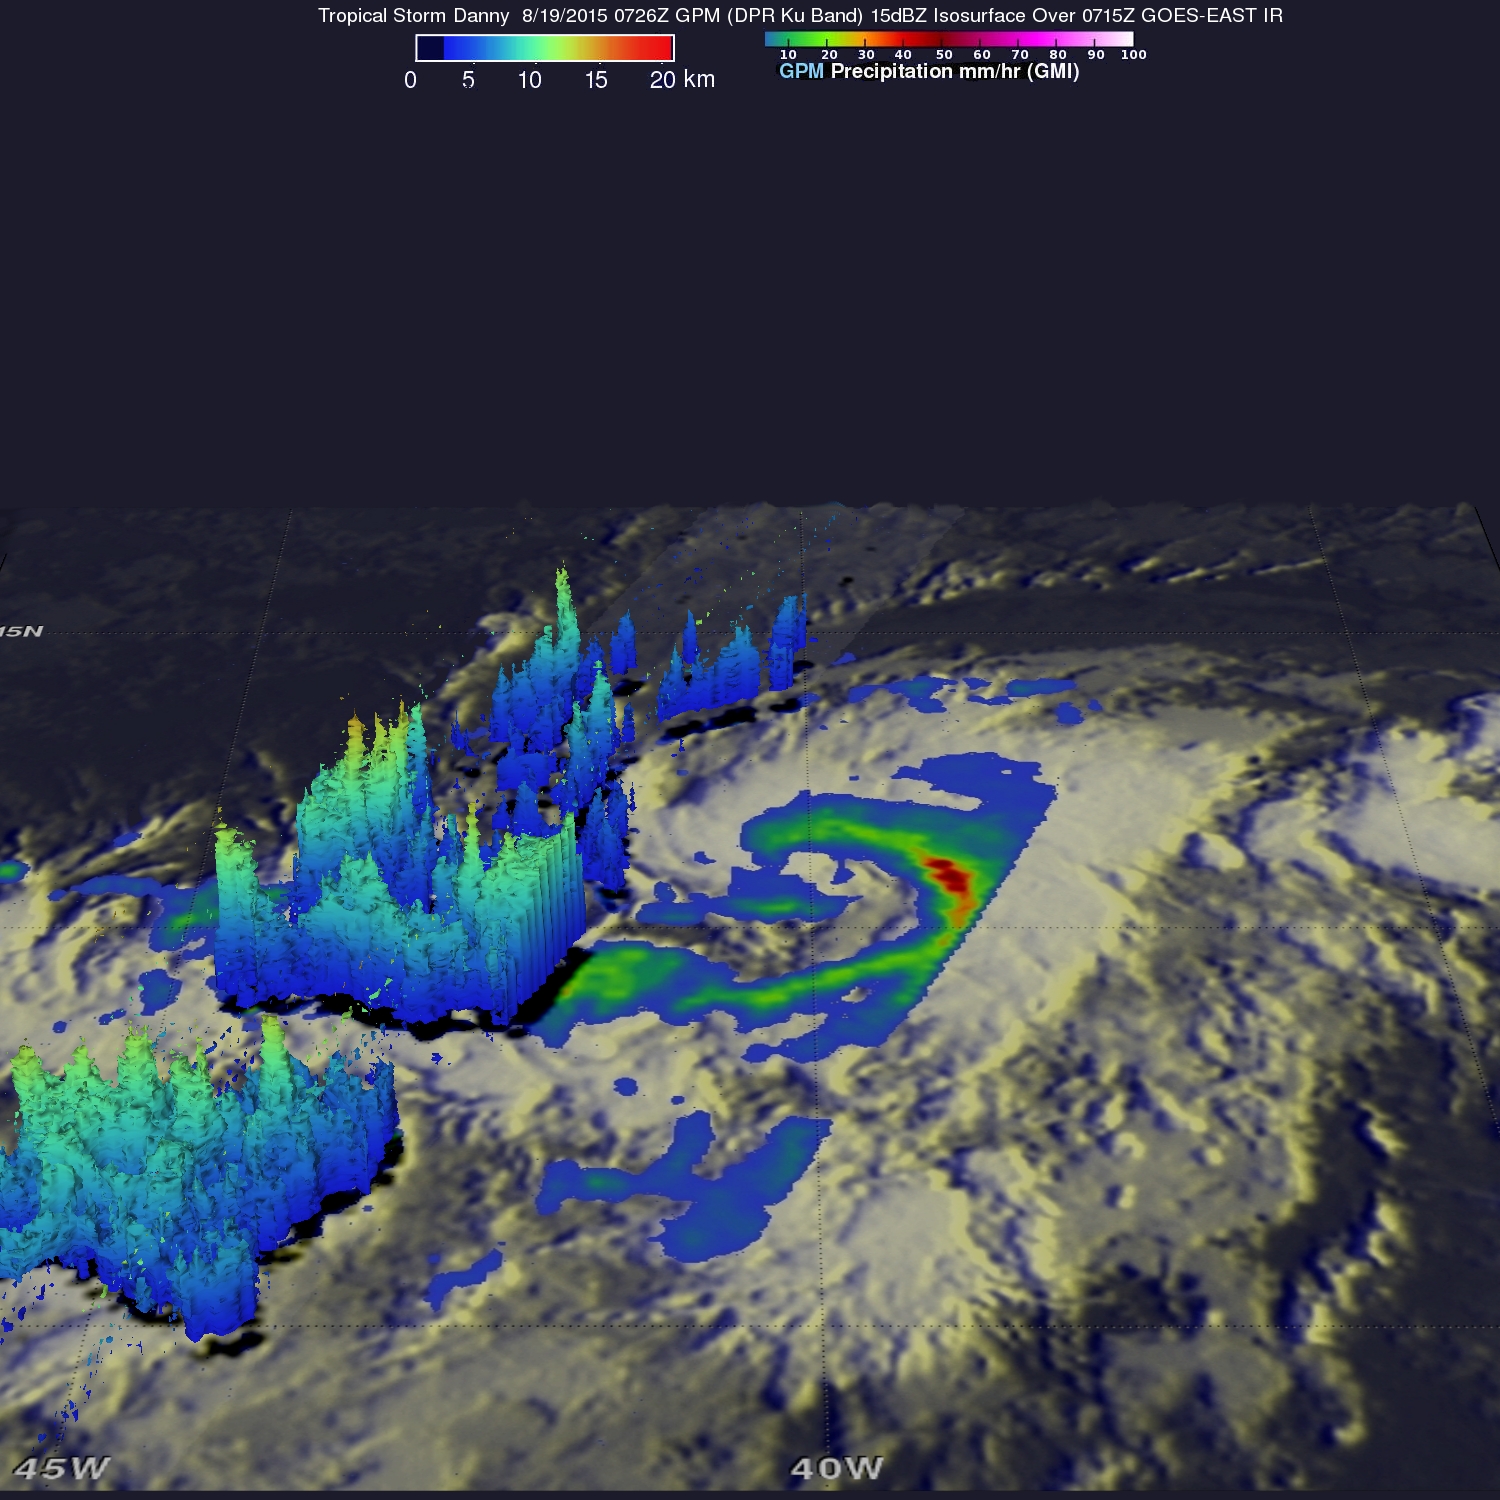 GPM image of Danny